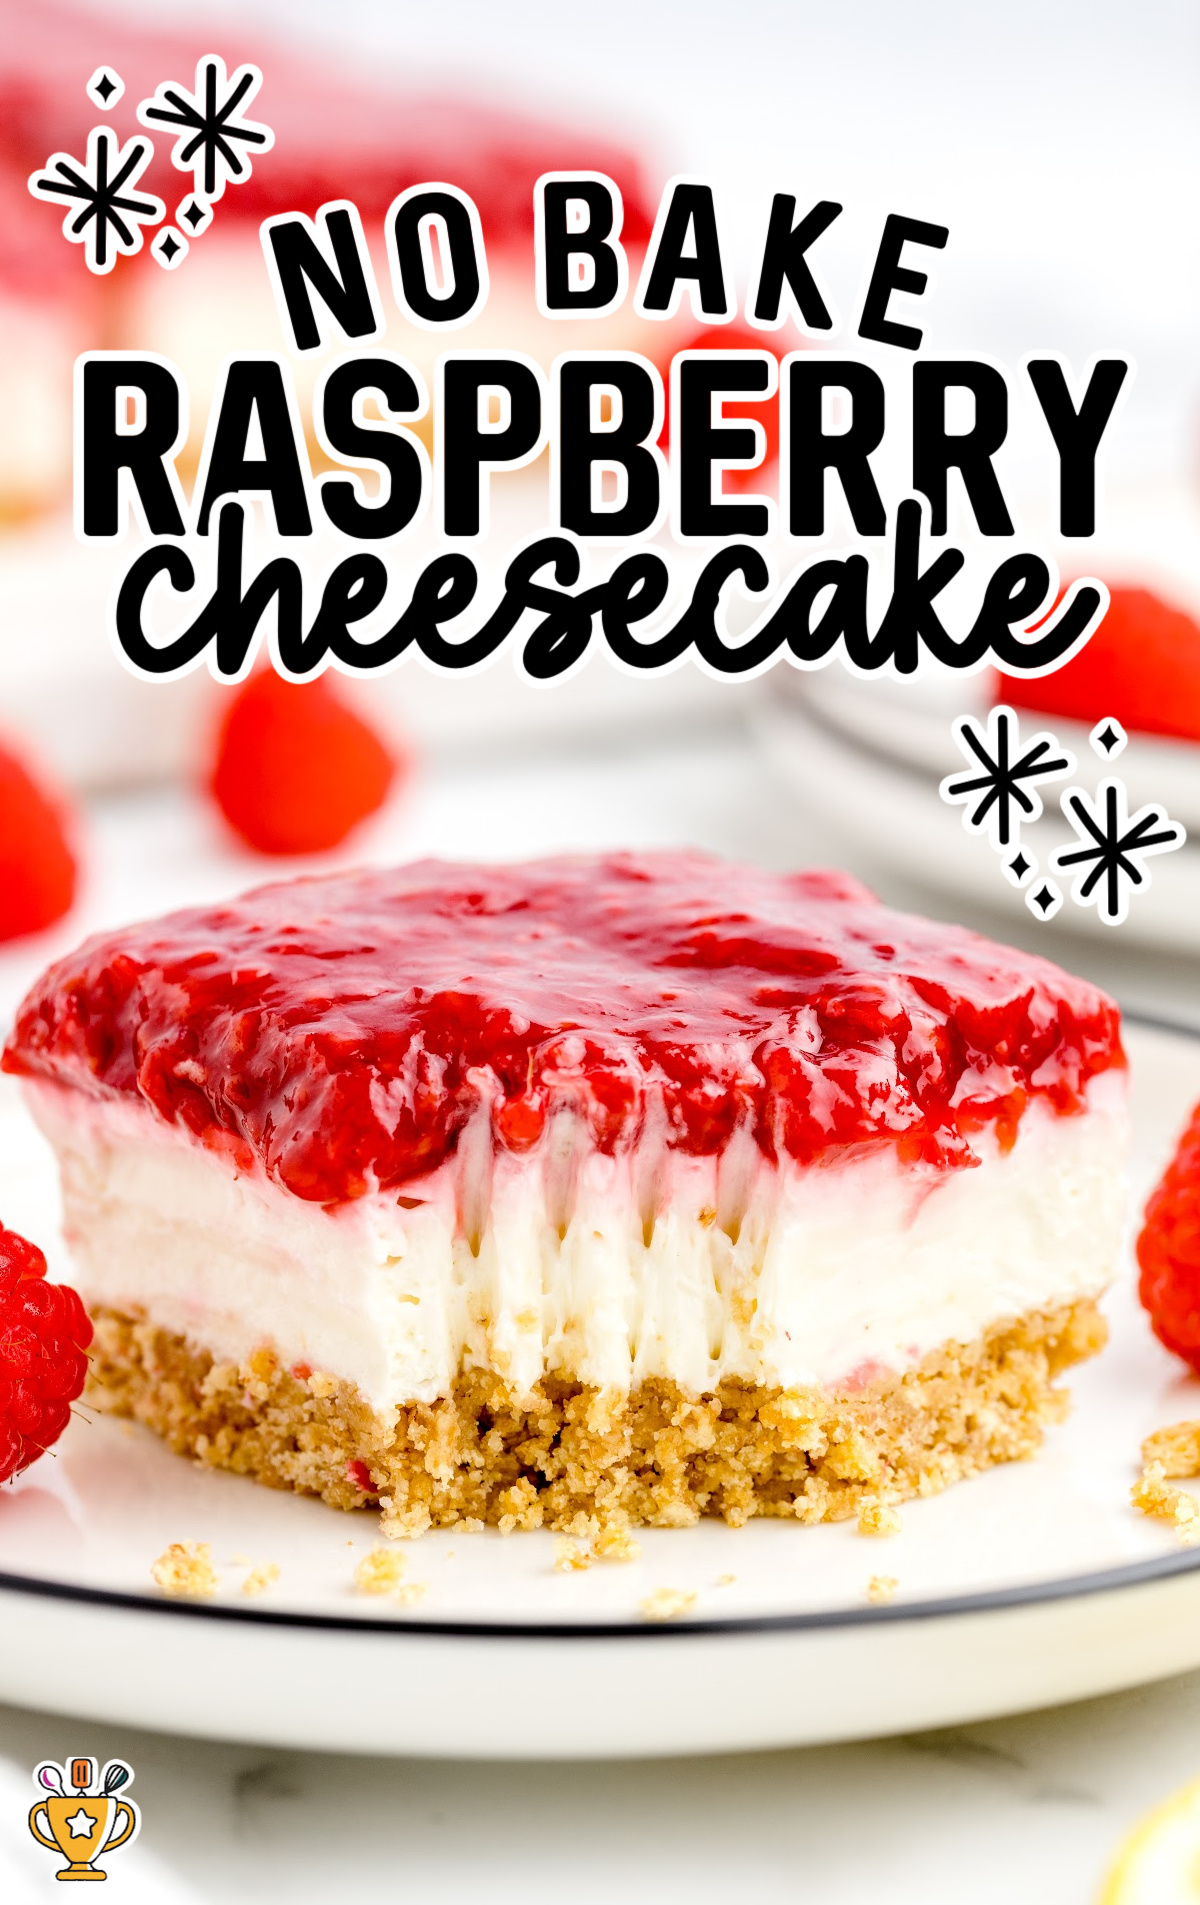 a slice of No Bake Raspberry Cheesecake on a plate with a bite taken out of it